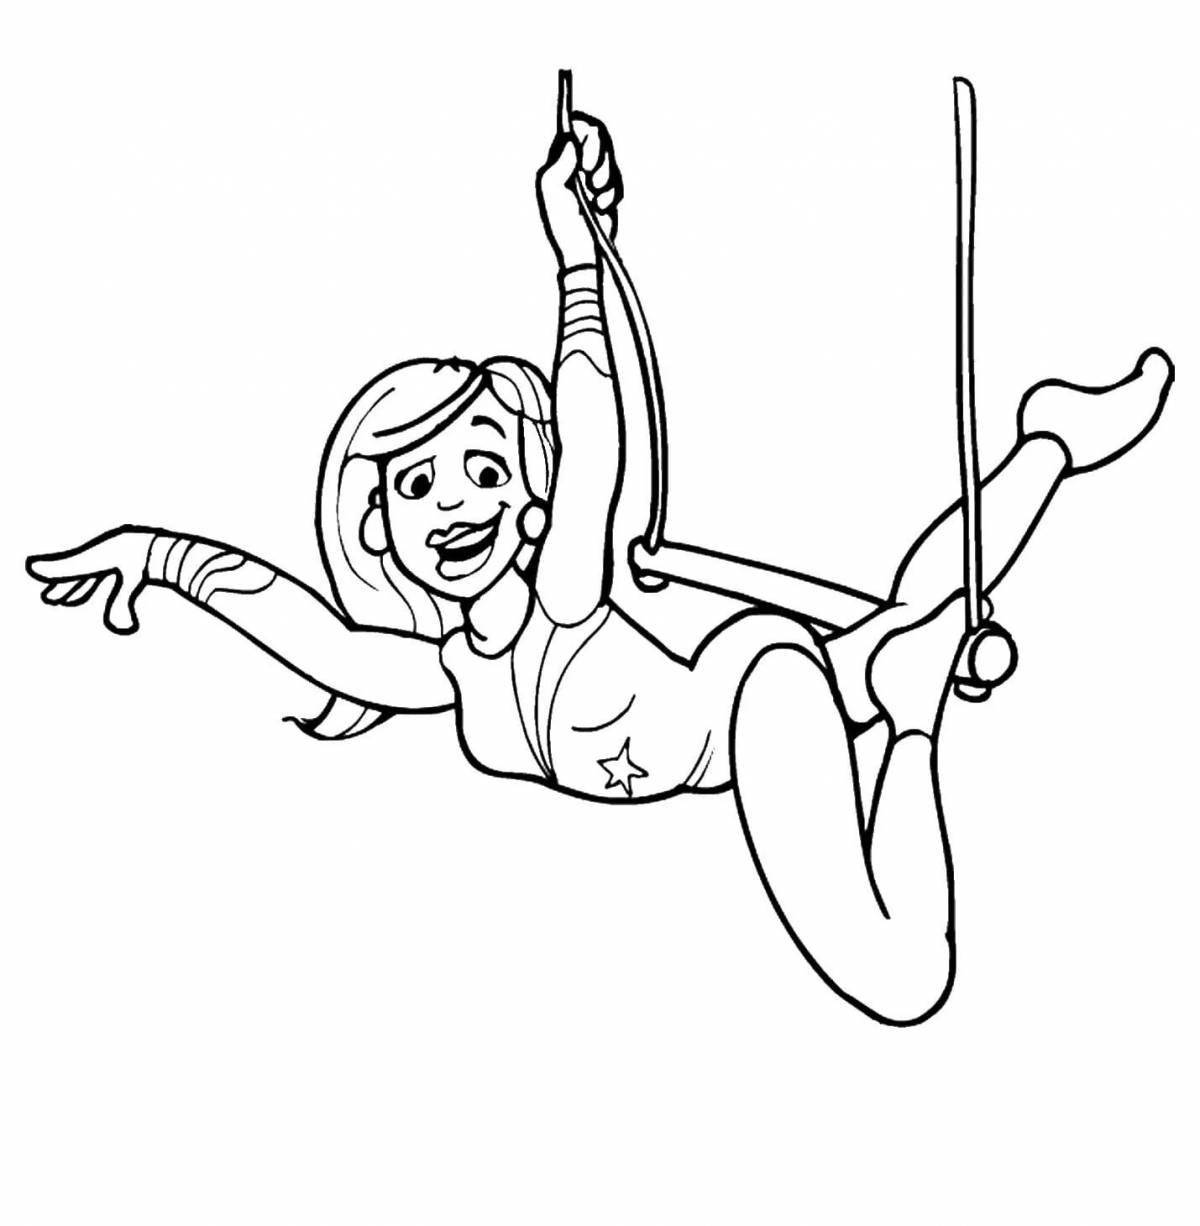 Coloring page colorful aerial gymnast